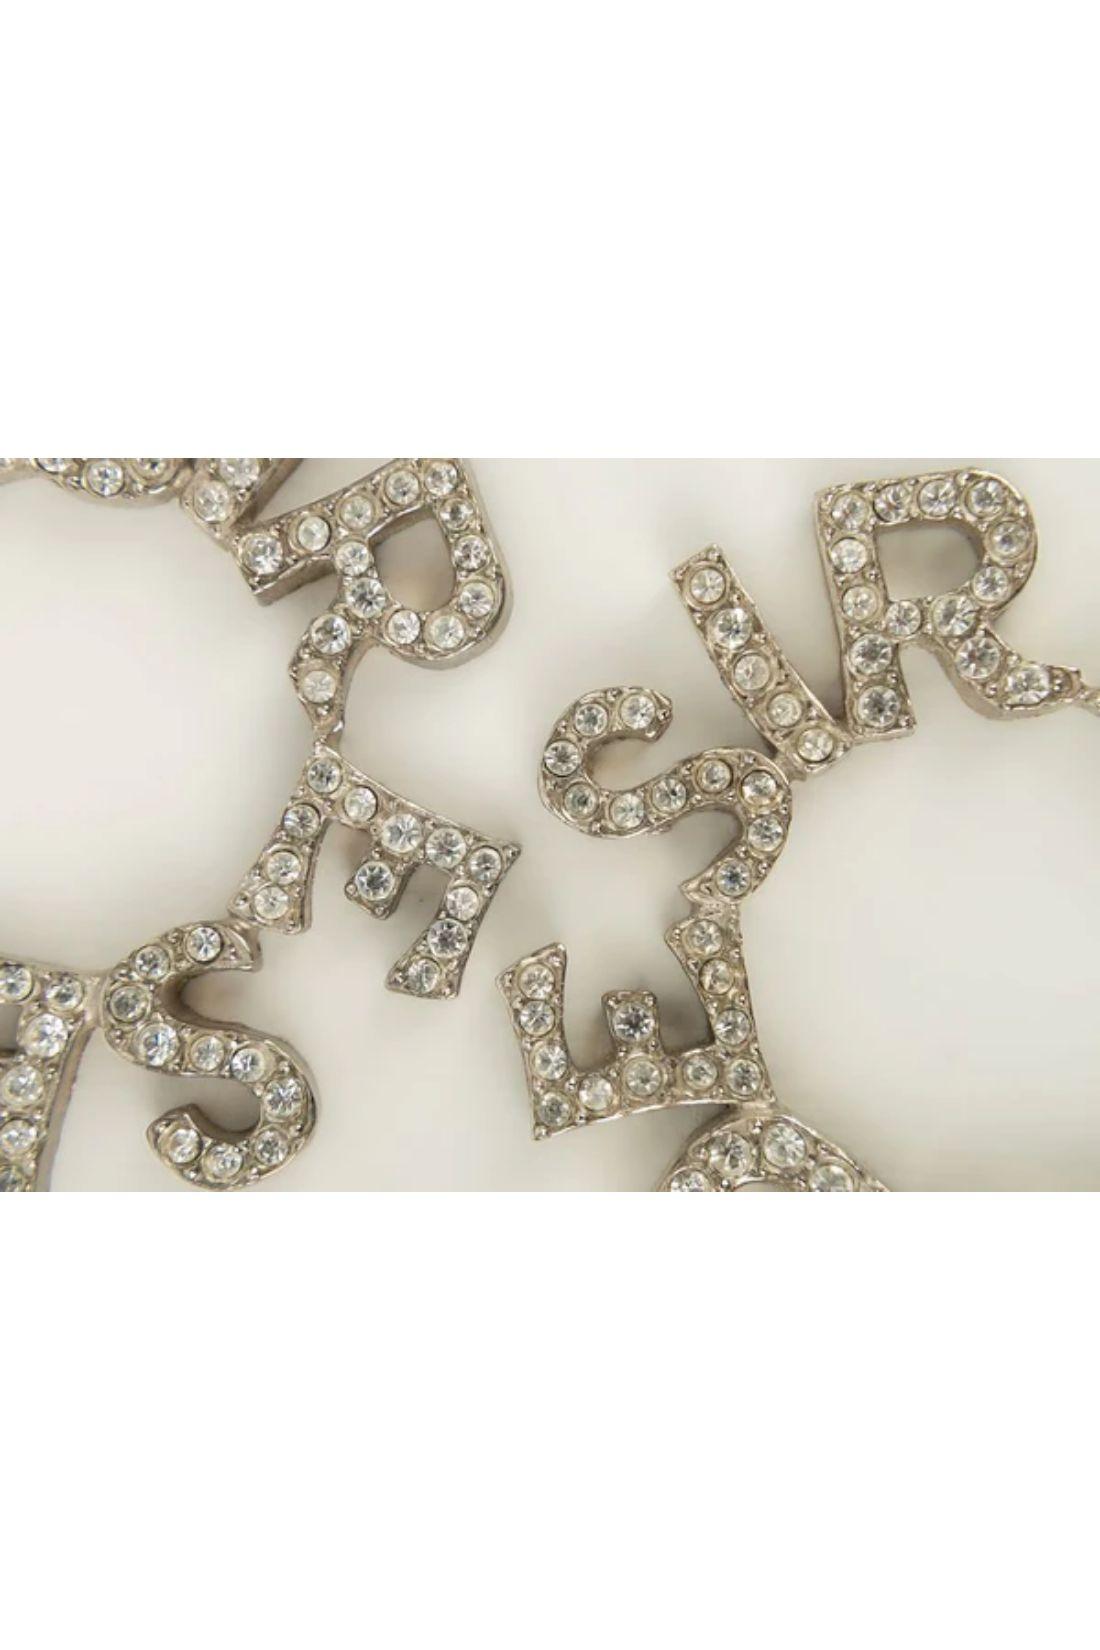 Women's Yves Saint Laurent Earrings in Silver Plated Metal Paved with Rhinestones For Sale